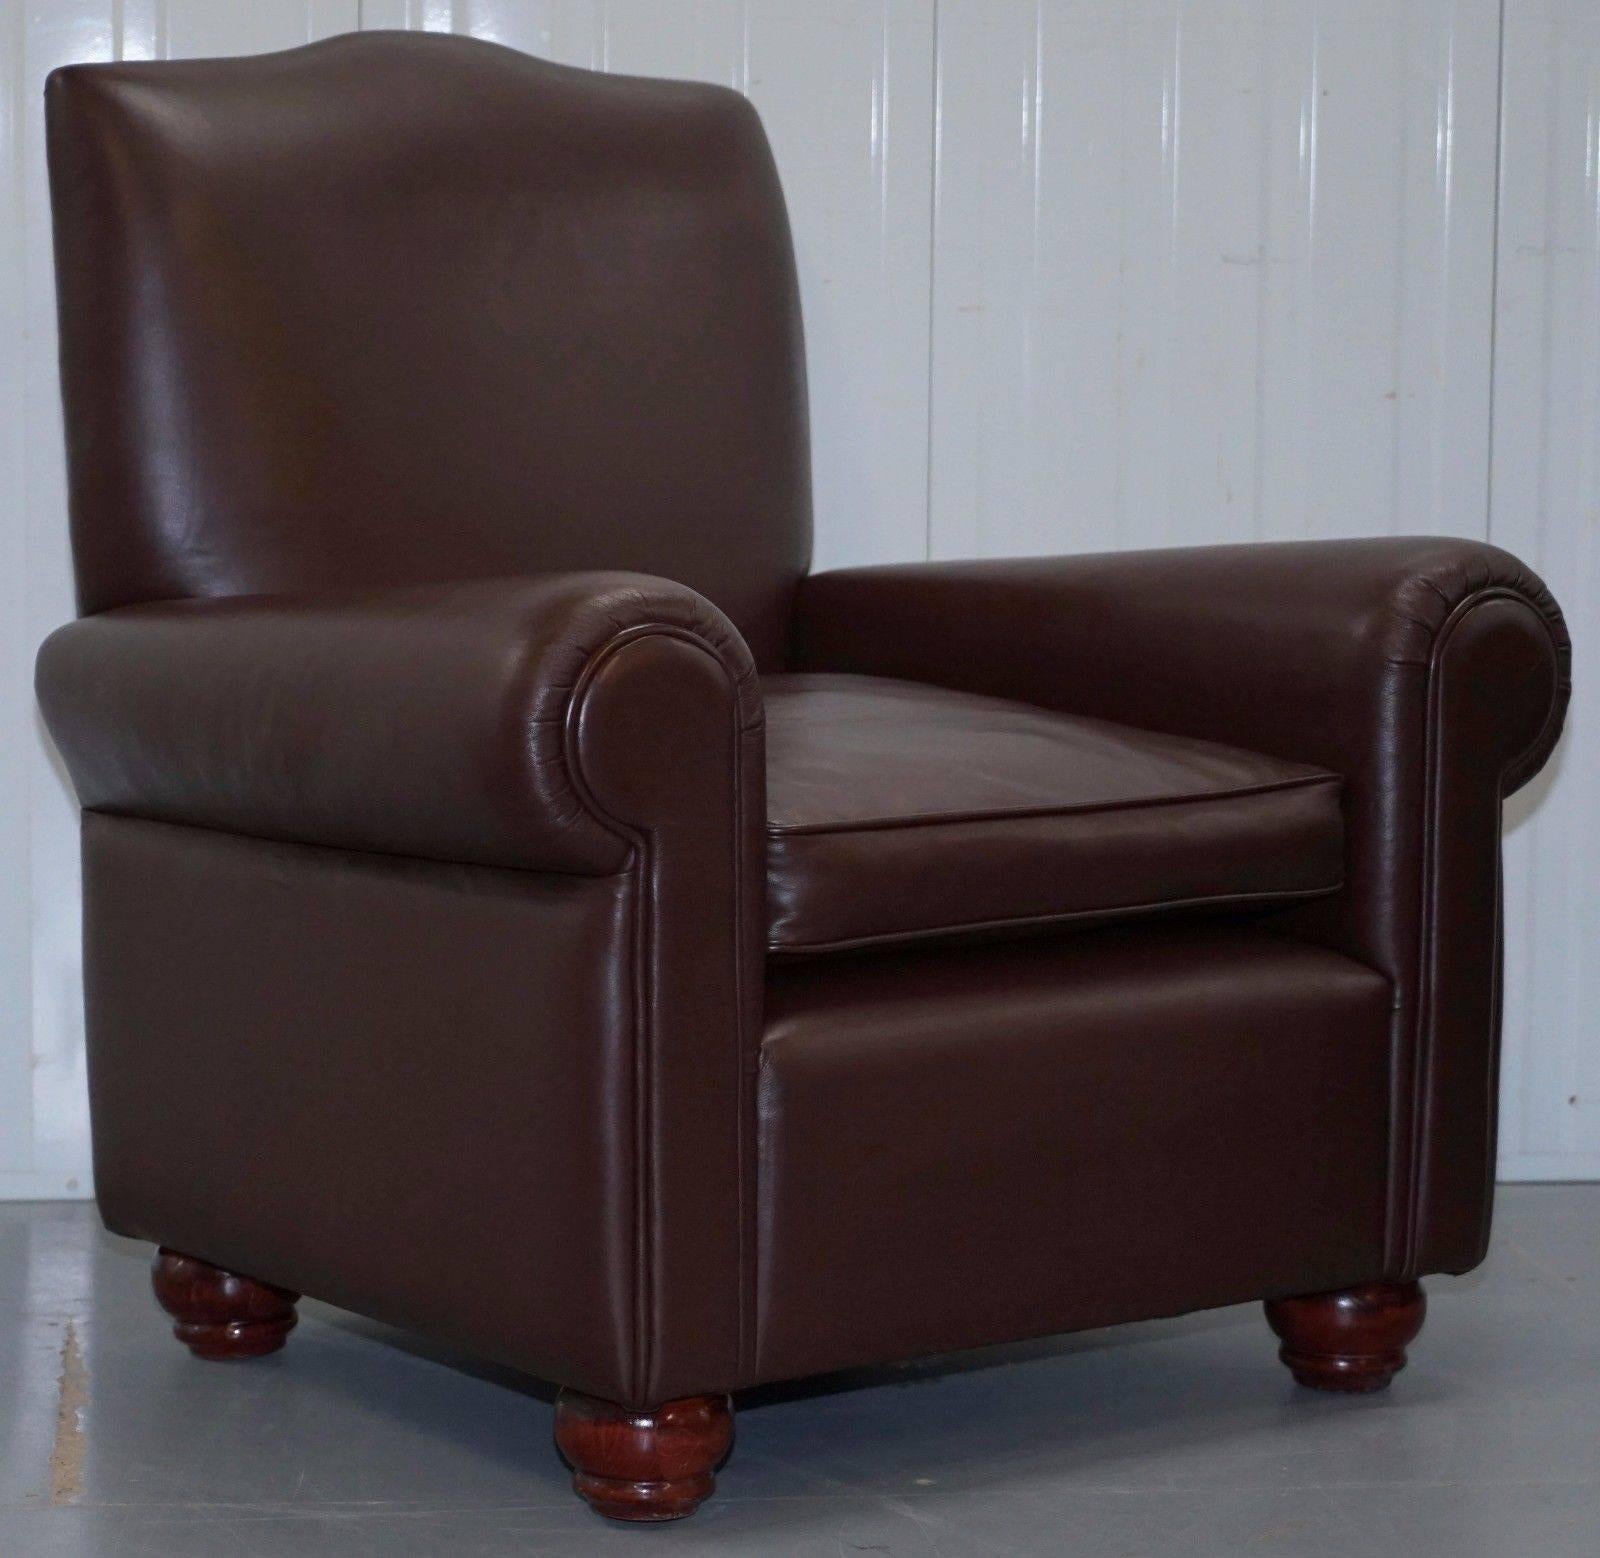 Wimbledon Furniture

We are delighted to offer for sale this absolutely stunning pair of Duresta brown leather luxury Contemporary straight back club armchairs RRP £3900

Please note the delivery fee listed is just a guide, for an accurate quote